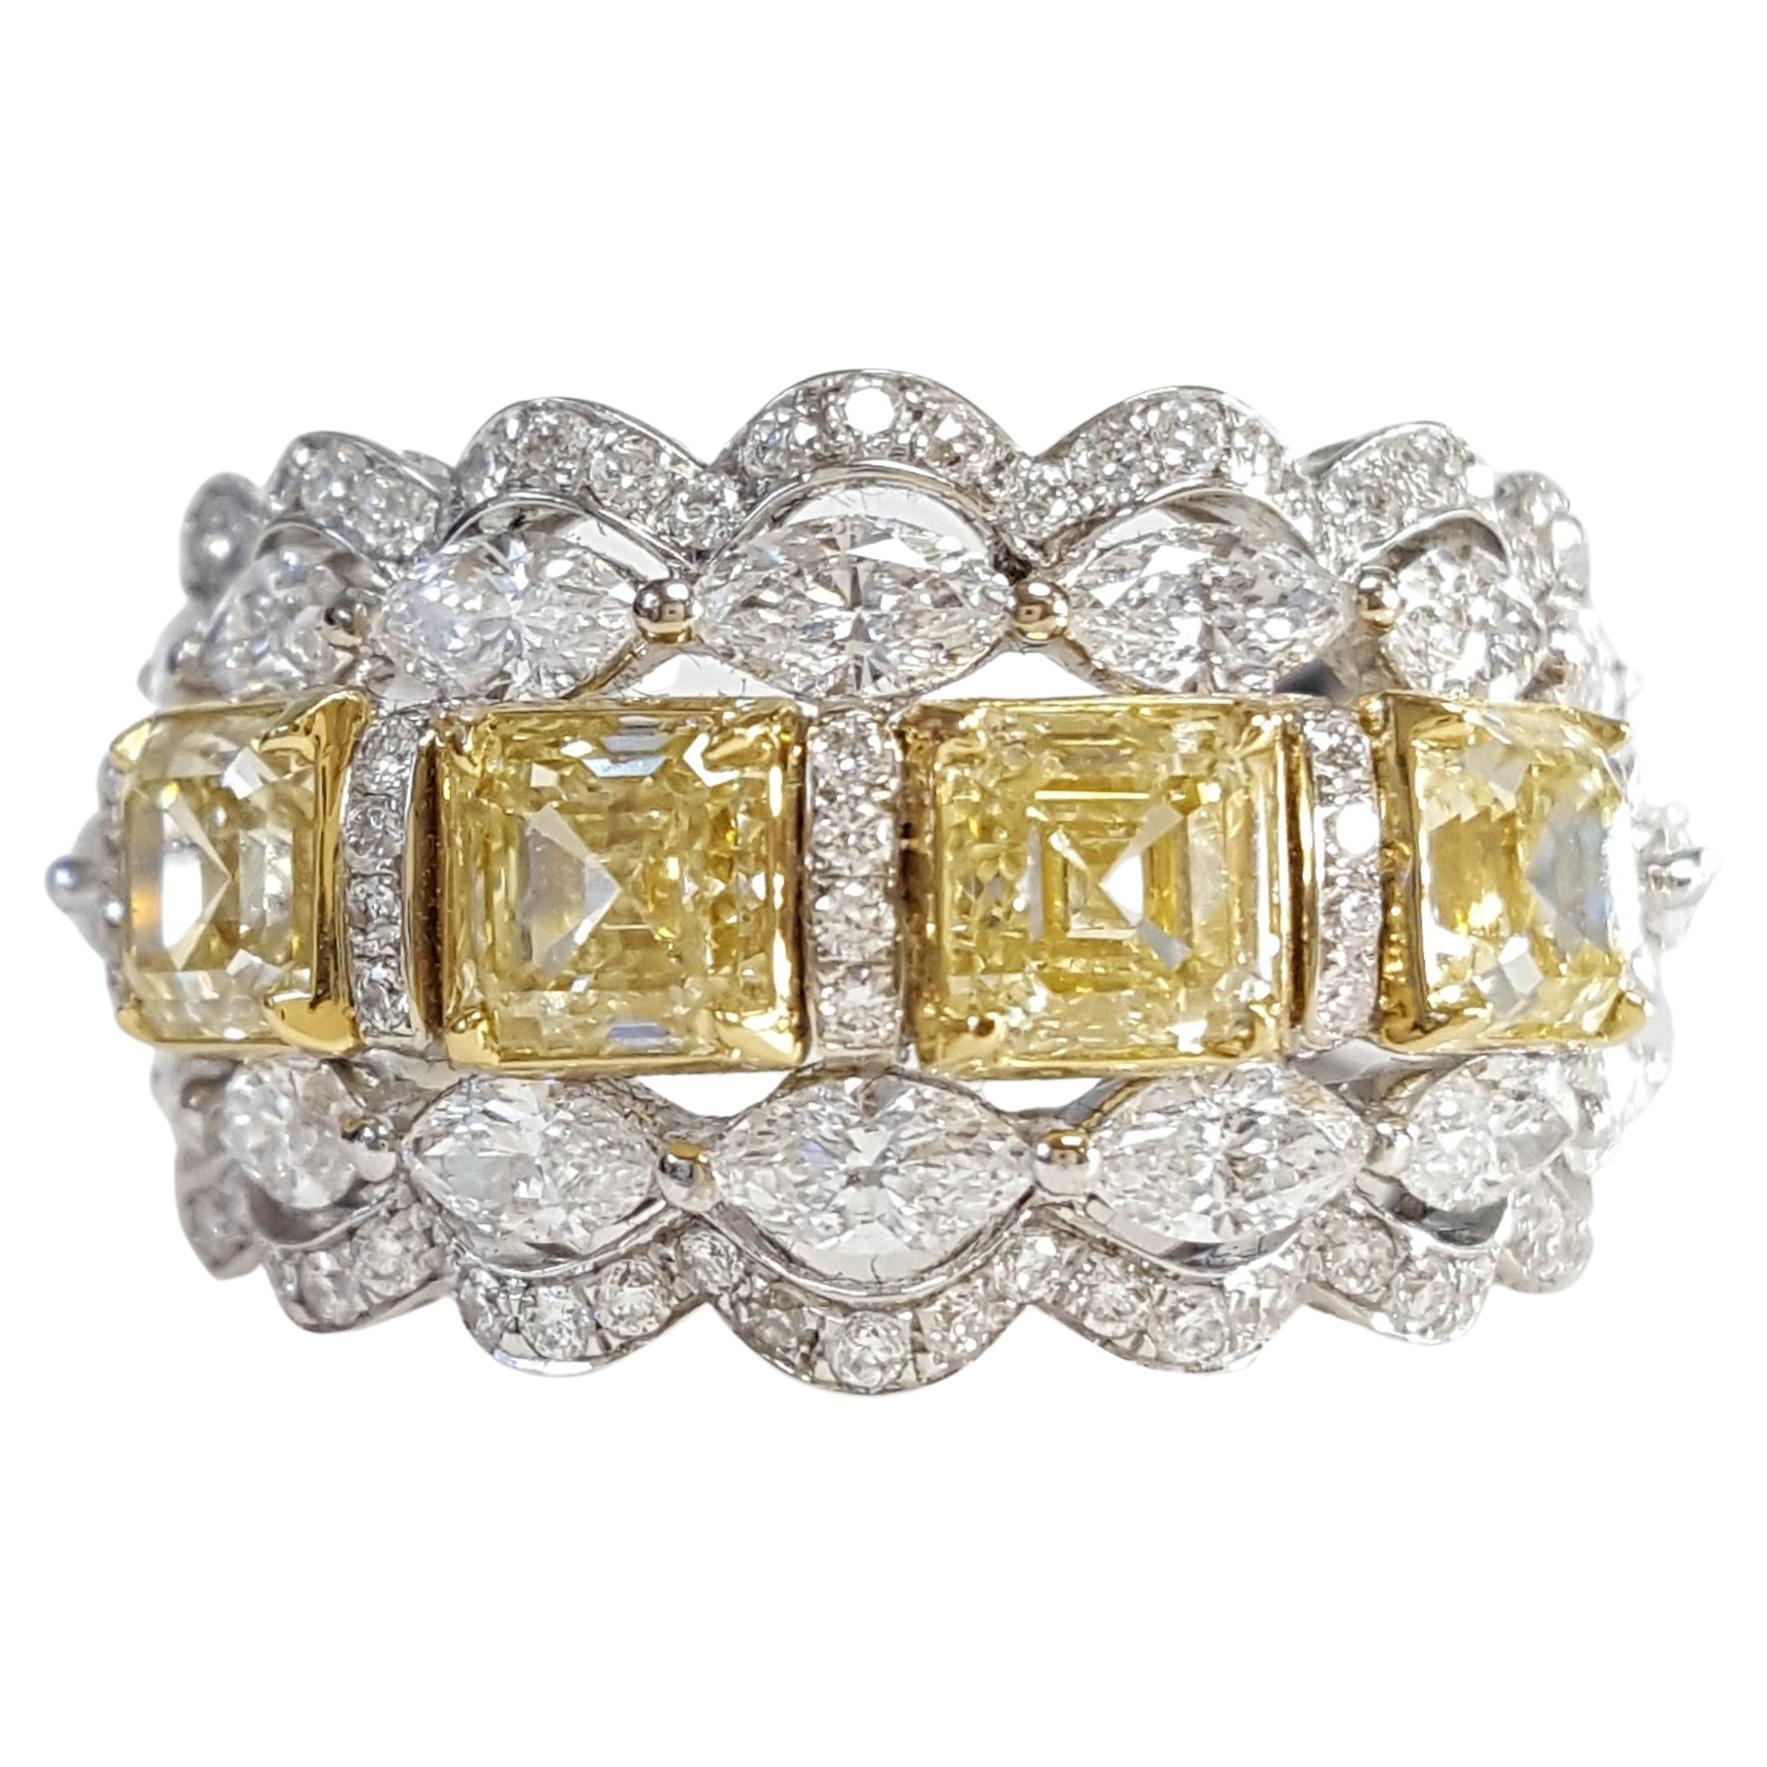 4.72 Asscher Cut Yellow & White Diamond Eternity Band Set in 18K White Gold. For Sale